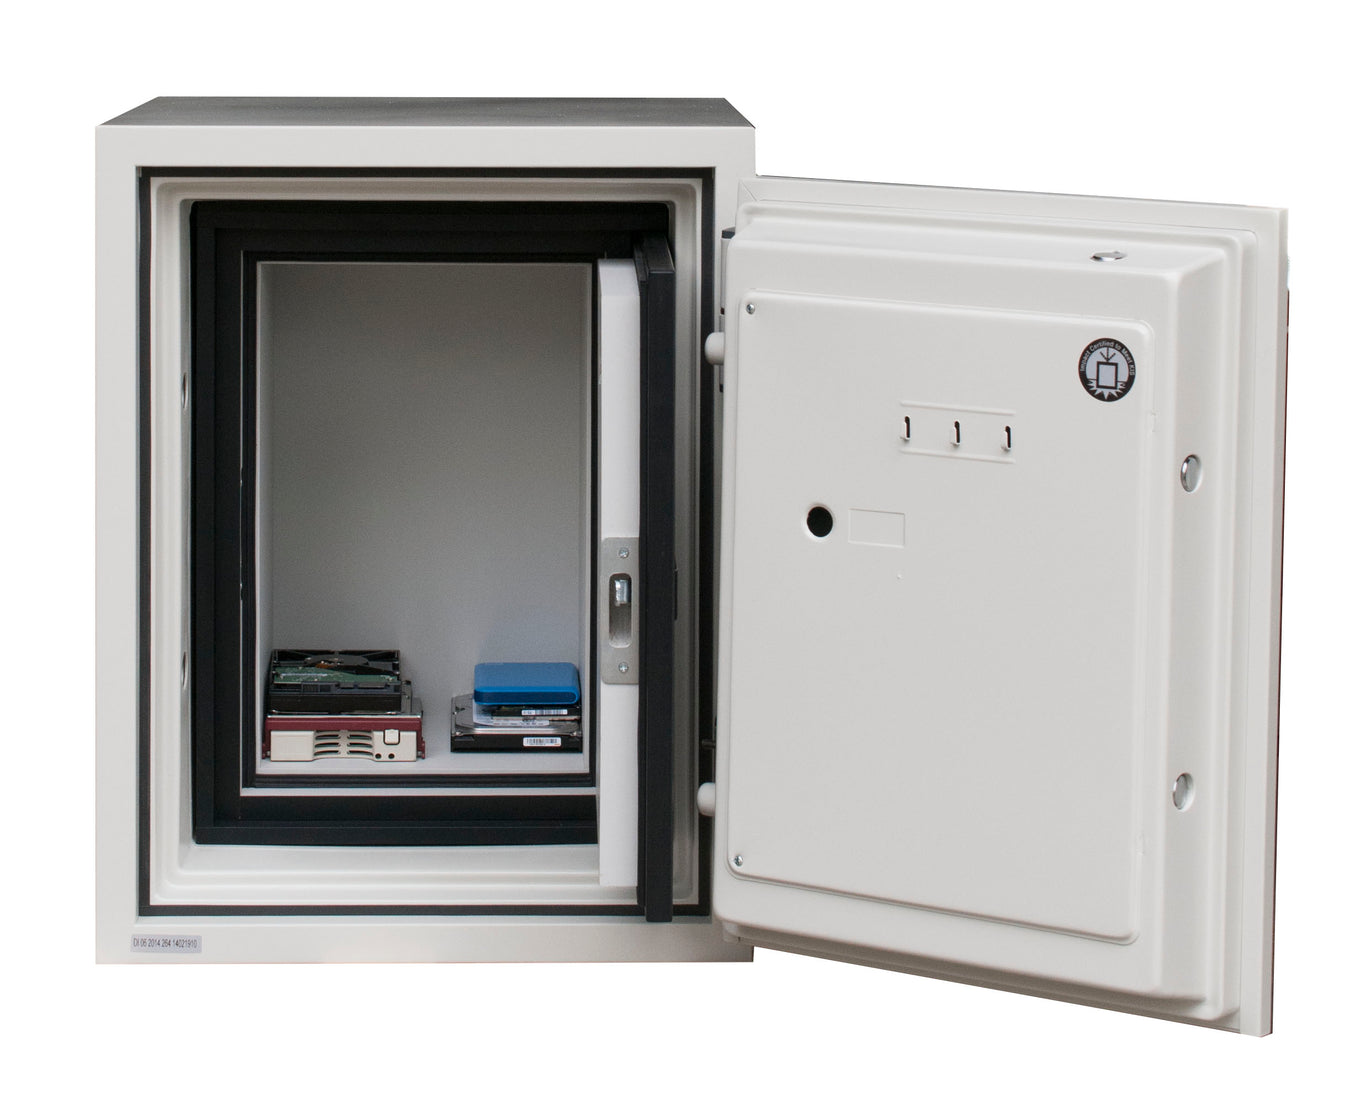 Fireproof media safe with tape cartridges and hard drives